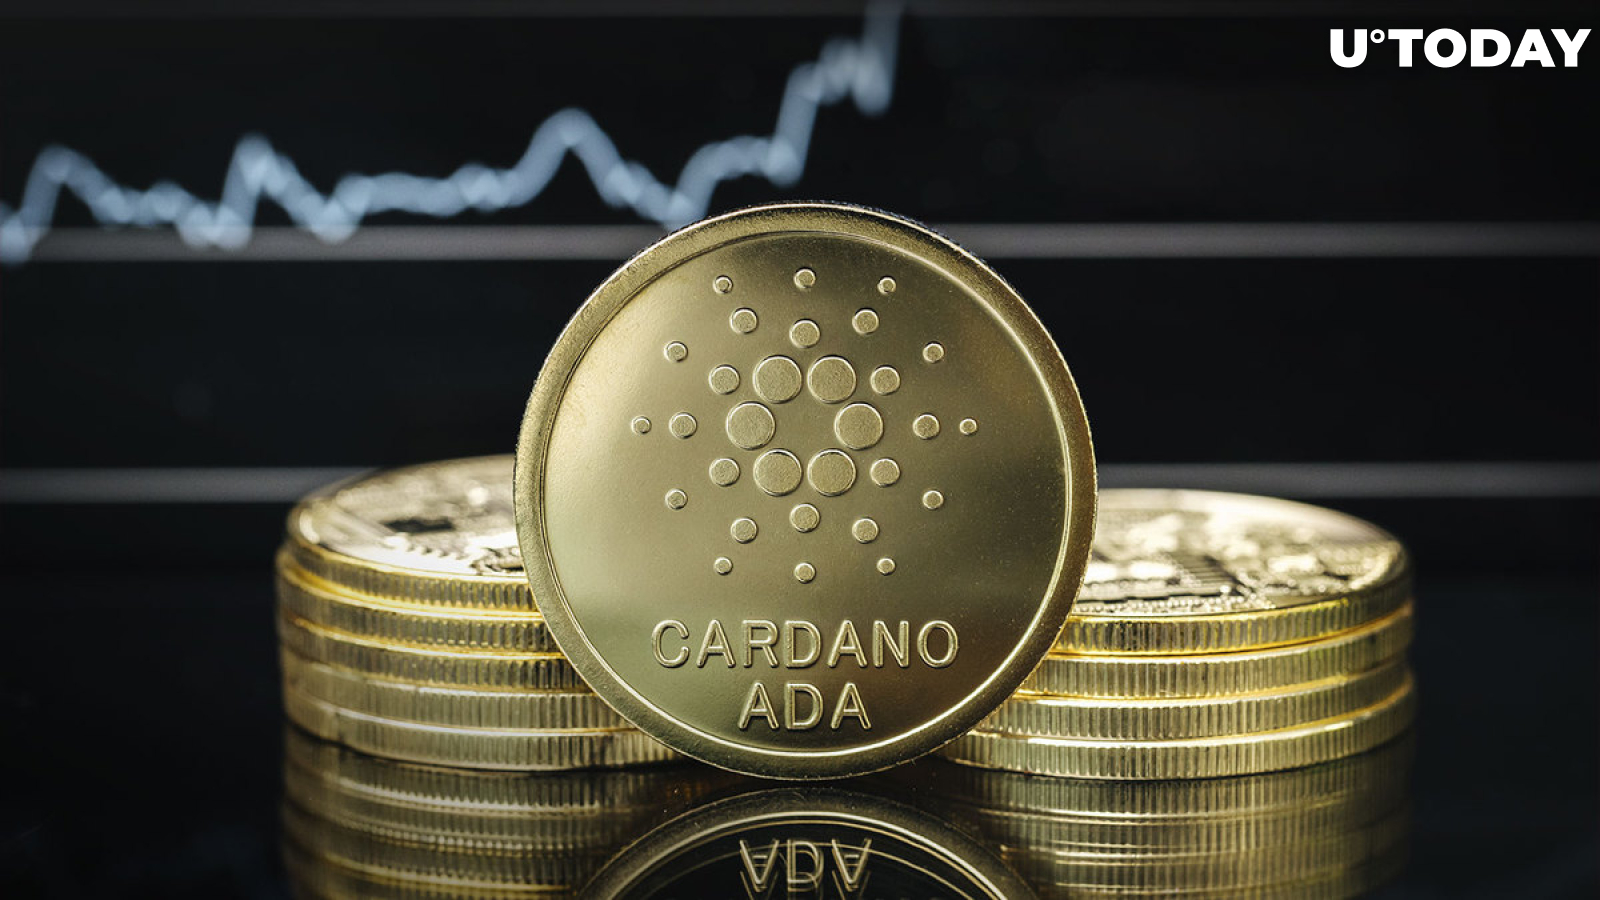 Cardano (ADA) Lifts Off by 7.7%, What Are Top Milestones to Watch?